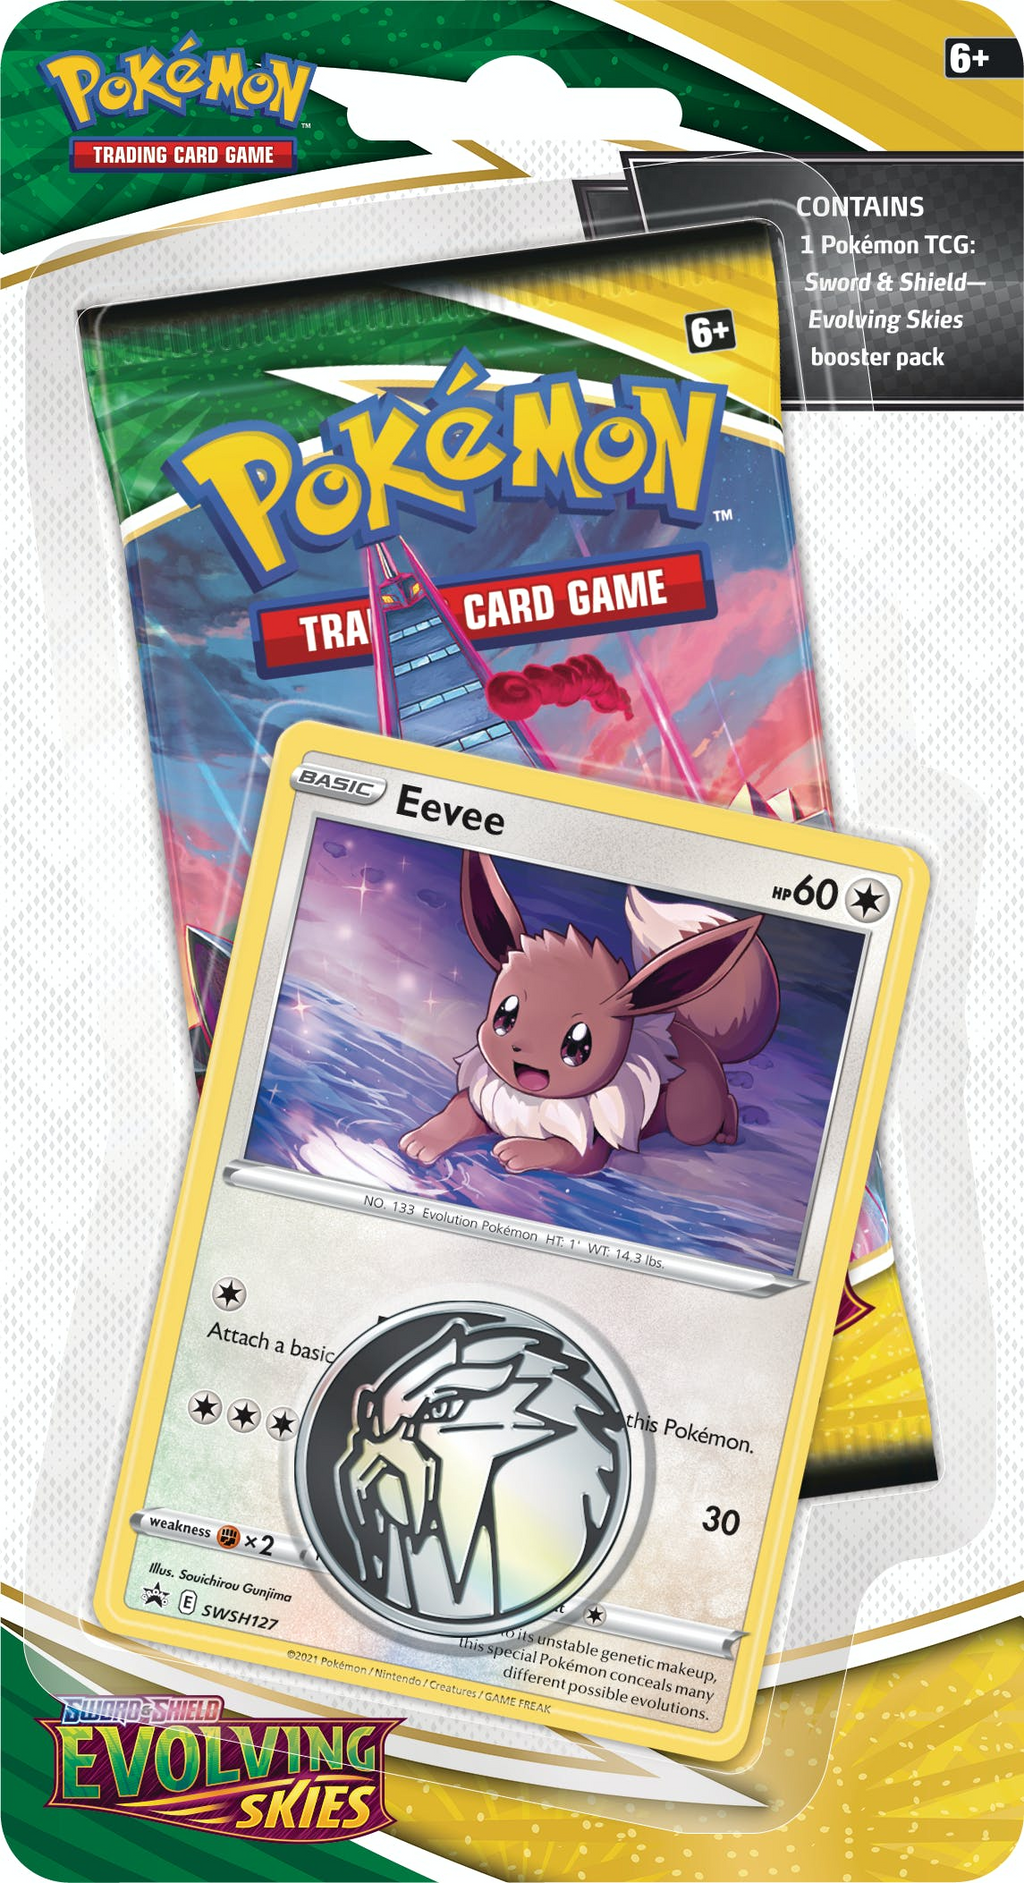 Eevee - Evolving Skies Pokemon Card of the Day 